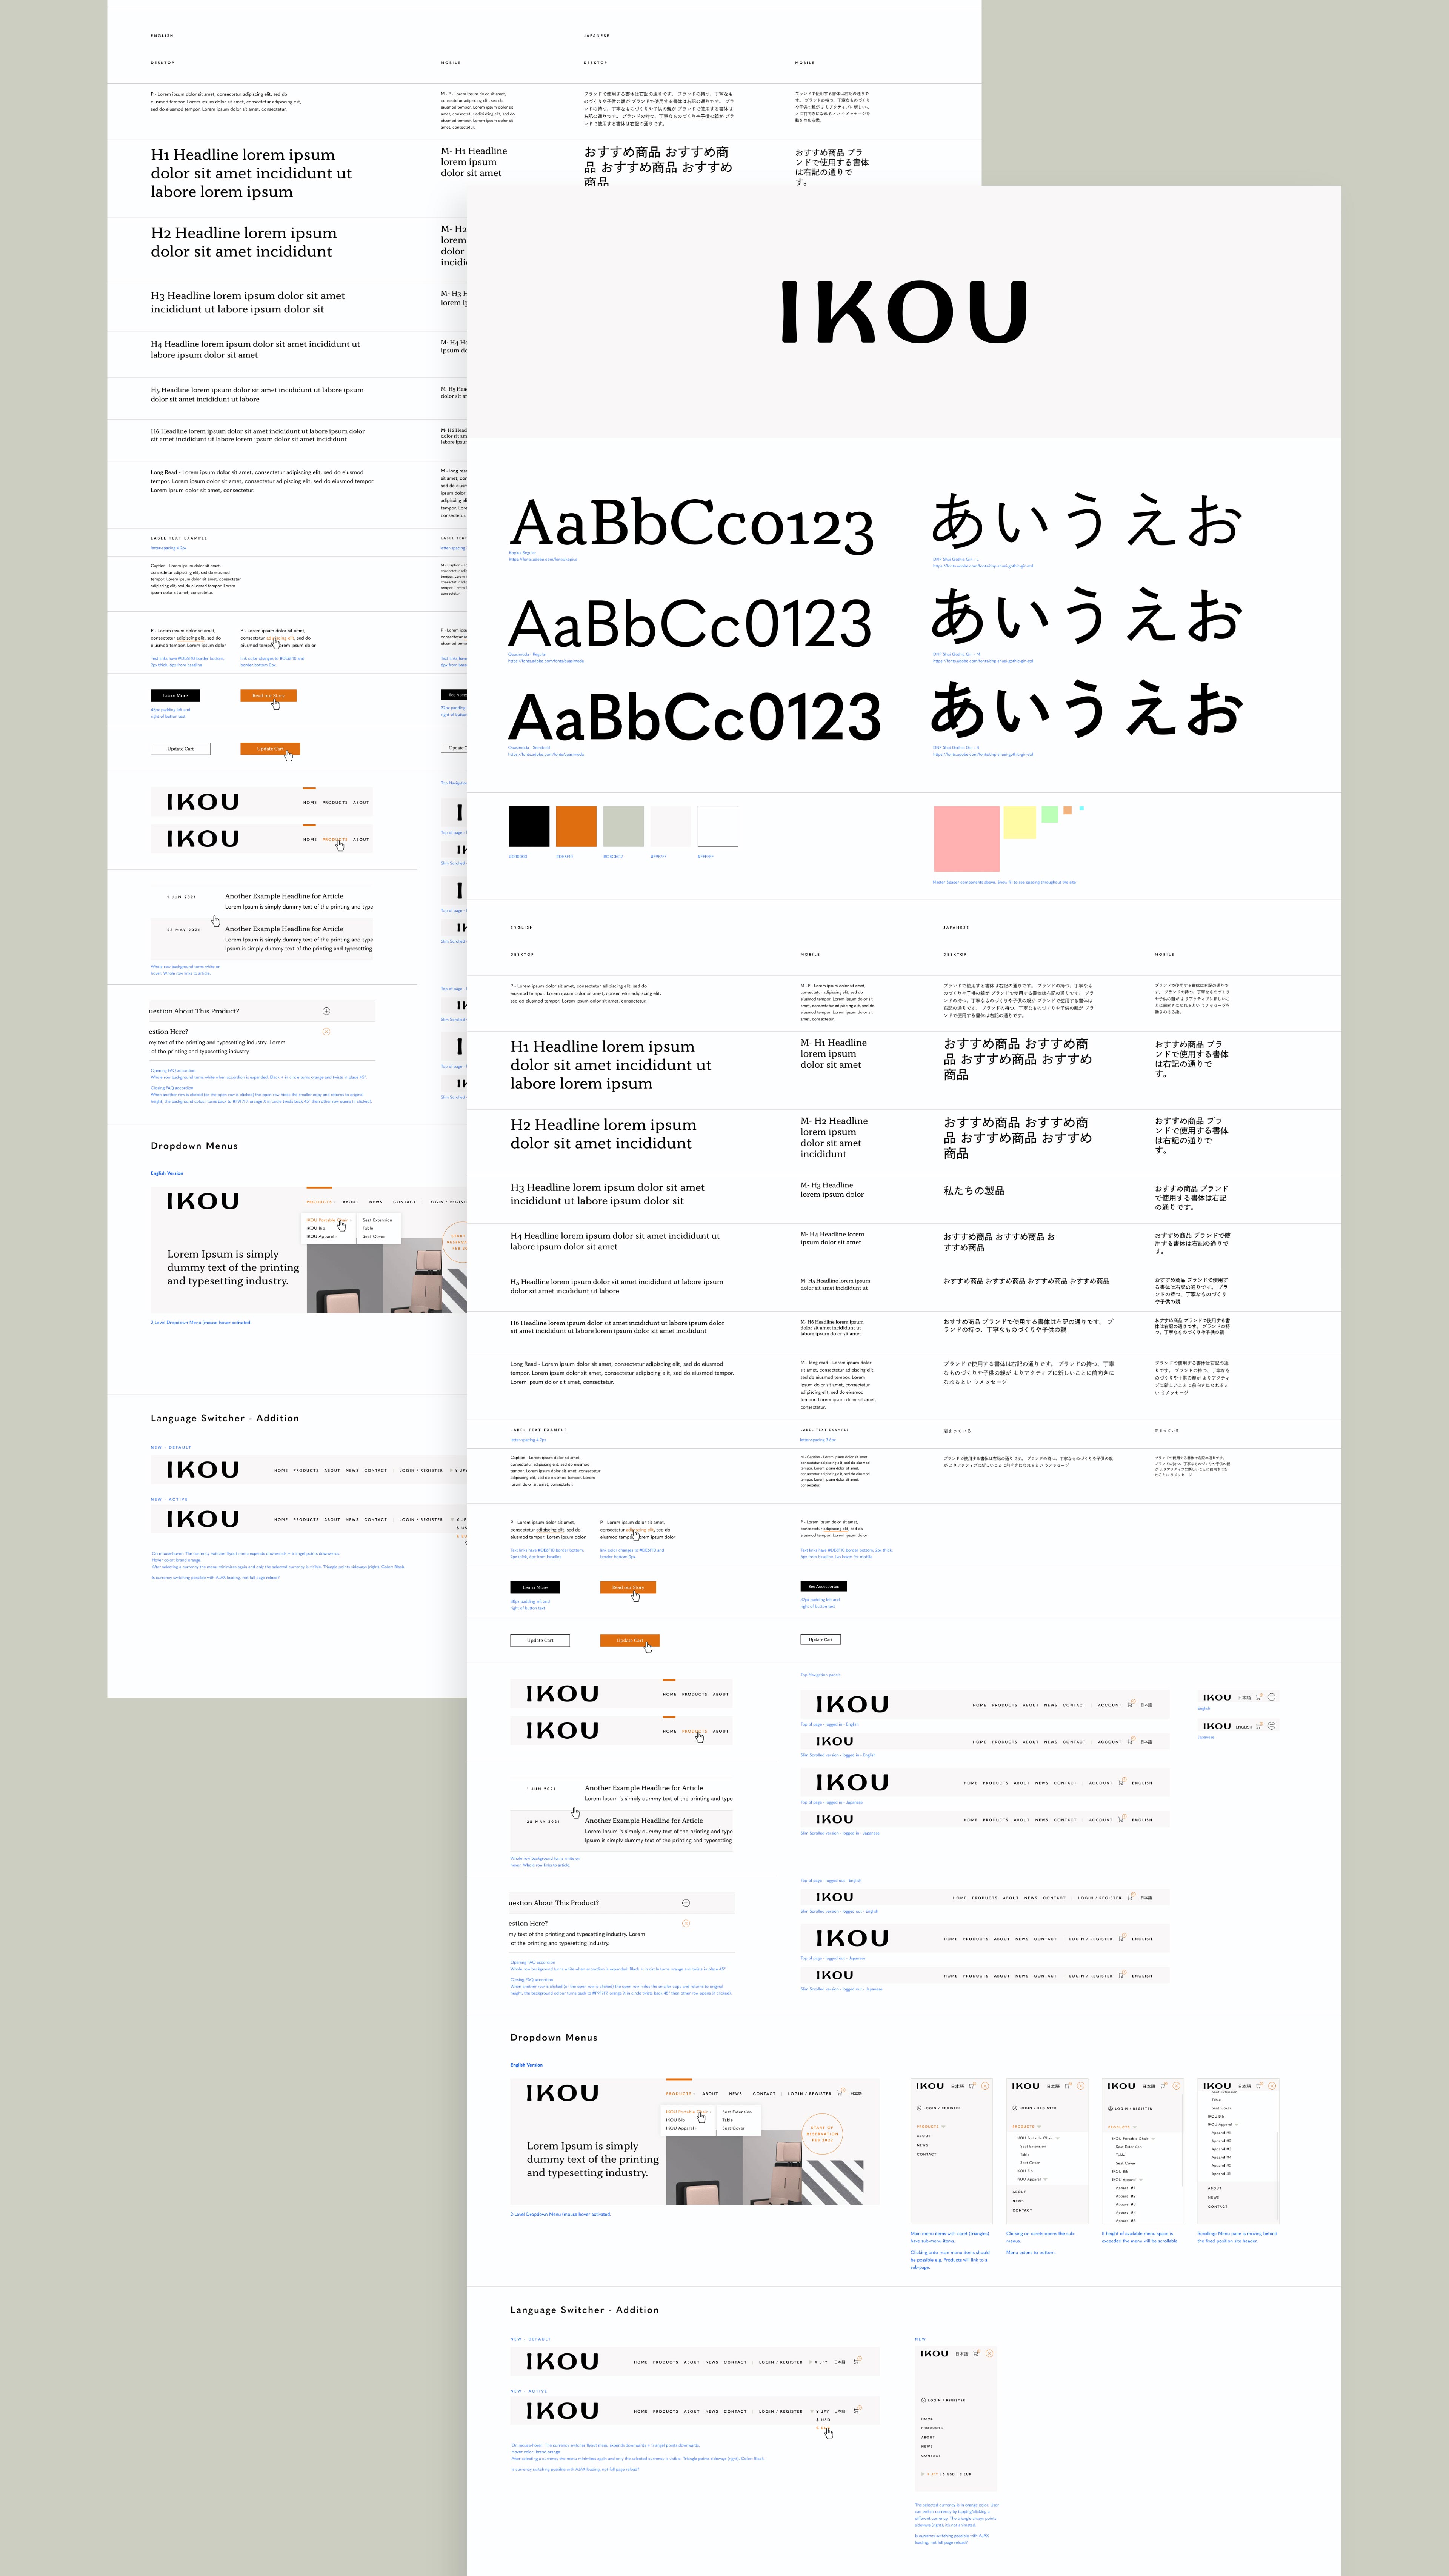 IKOU - Design Guideline & Style Guide